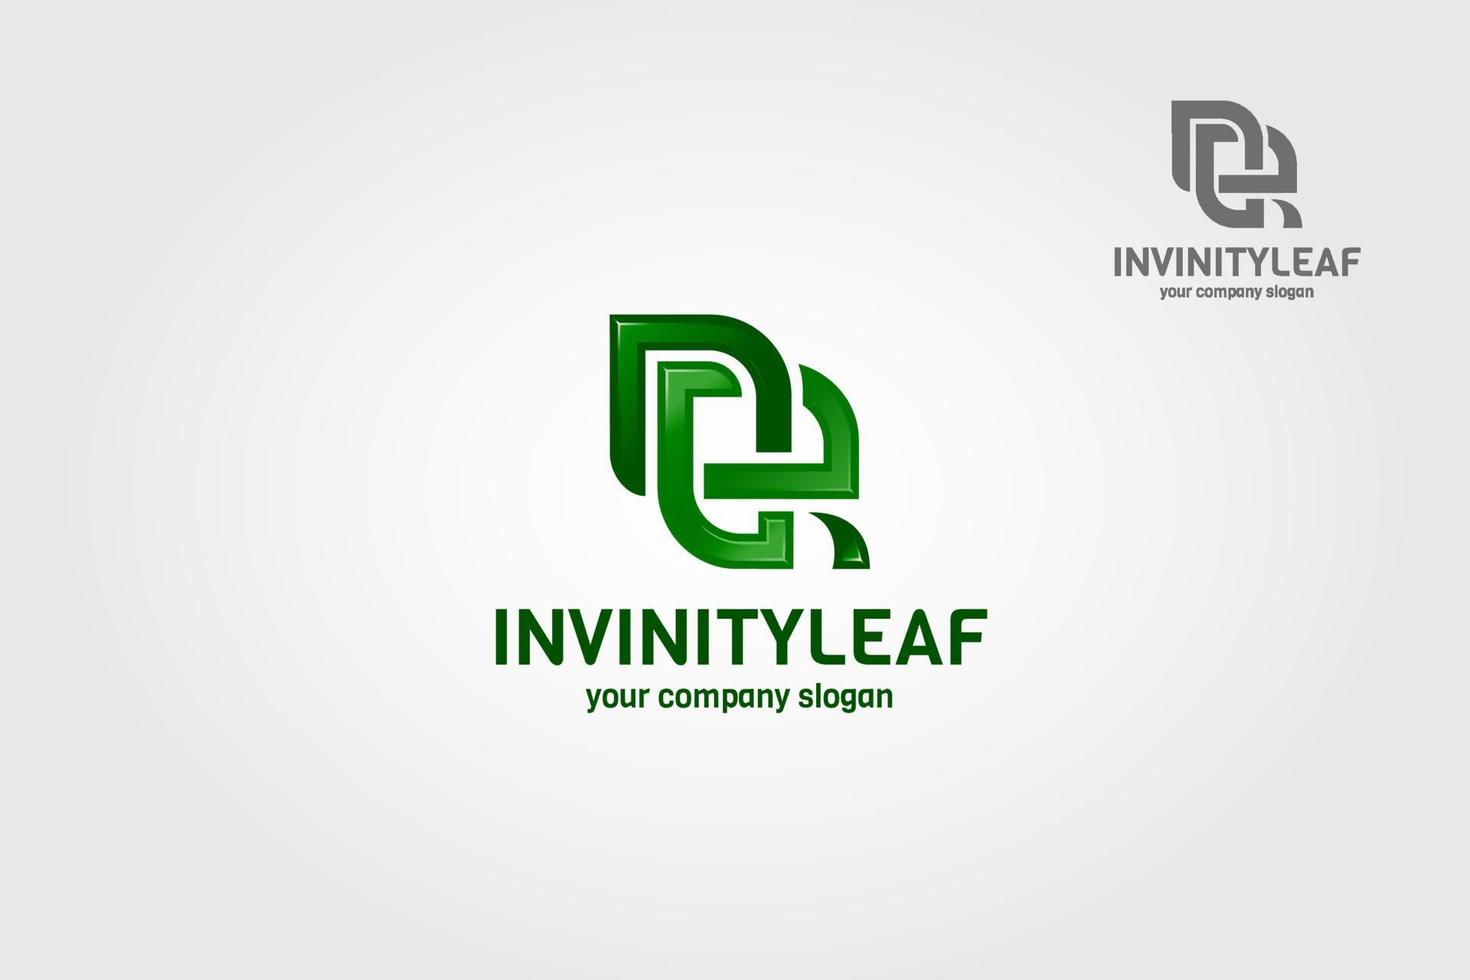 InfinityLeaf Vector logo template. An excellent logo template in high quality and easy to use with editable font and colors. Simple, unique and professional logo illustration.